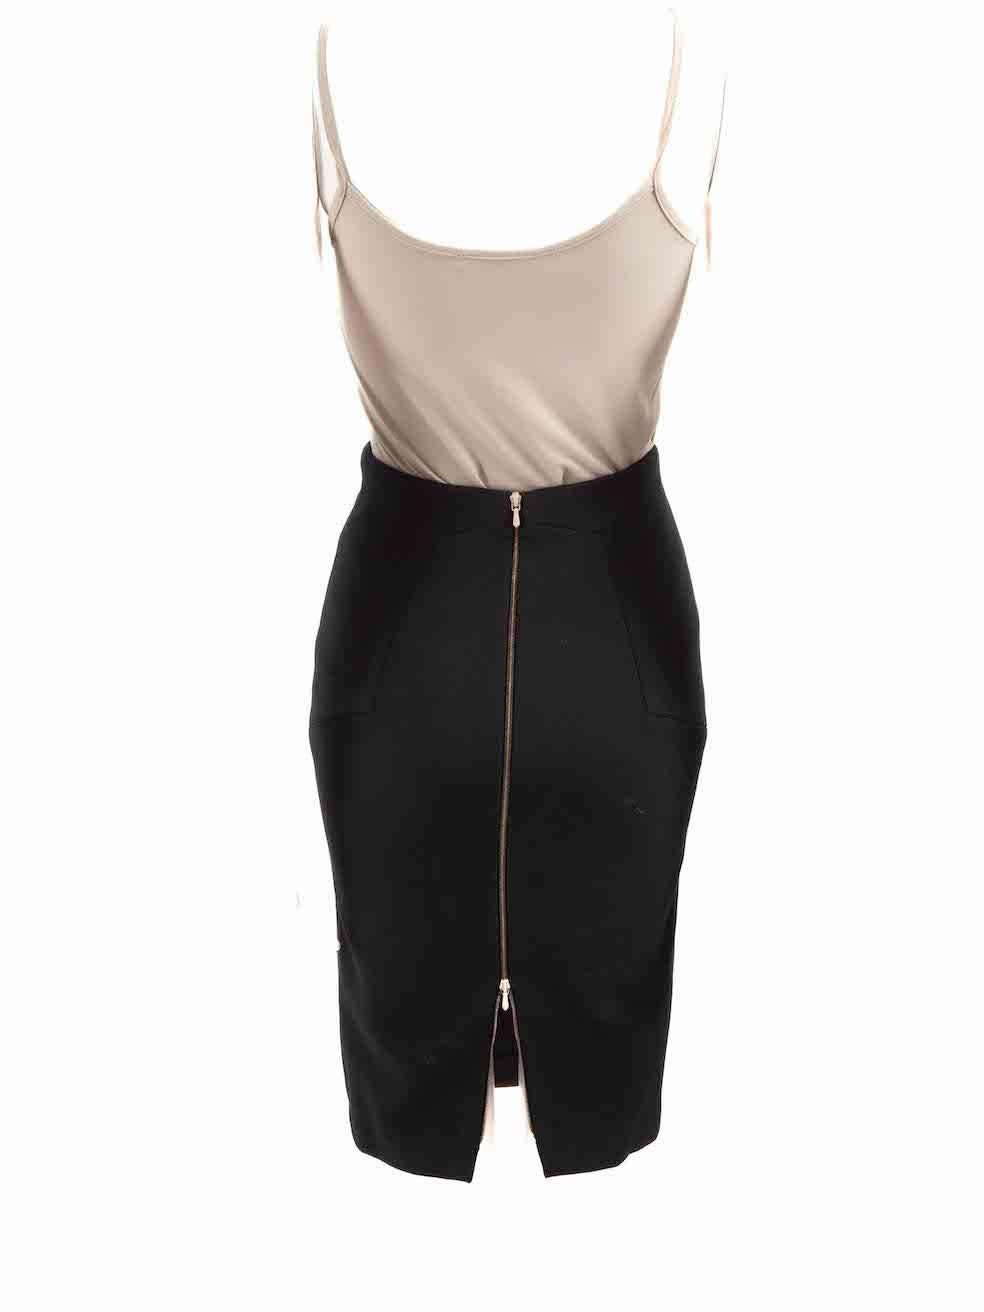 Victoria Beckham Black Wool Midi Pencil Skirt Size XS In Good Condition For Sale In London, GB